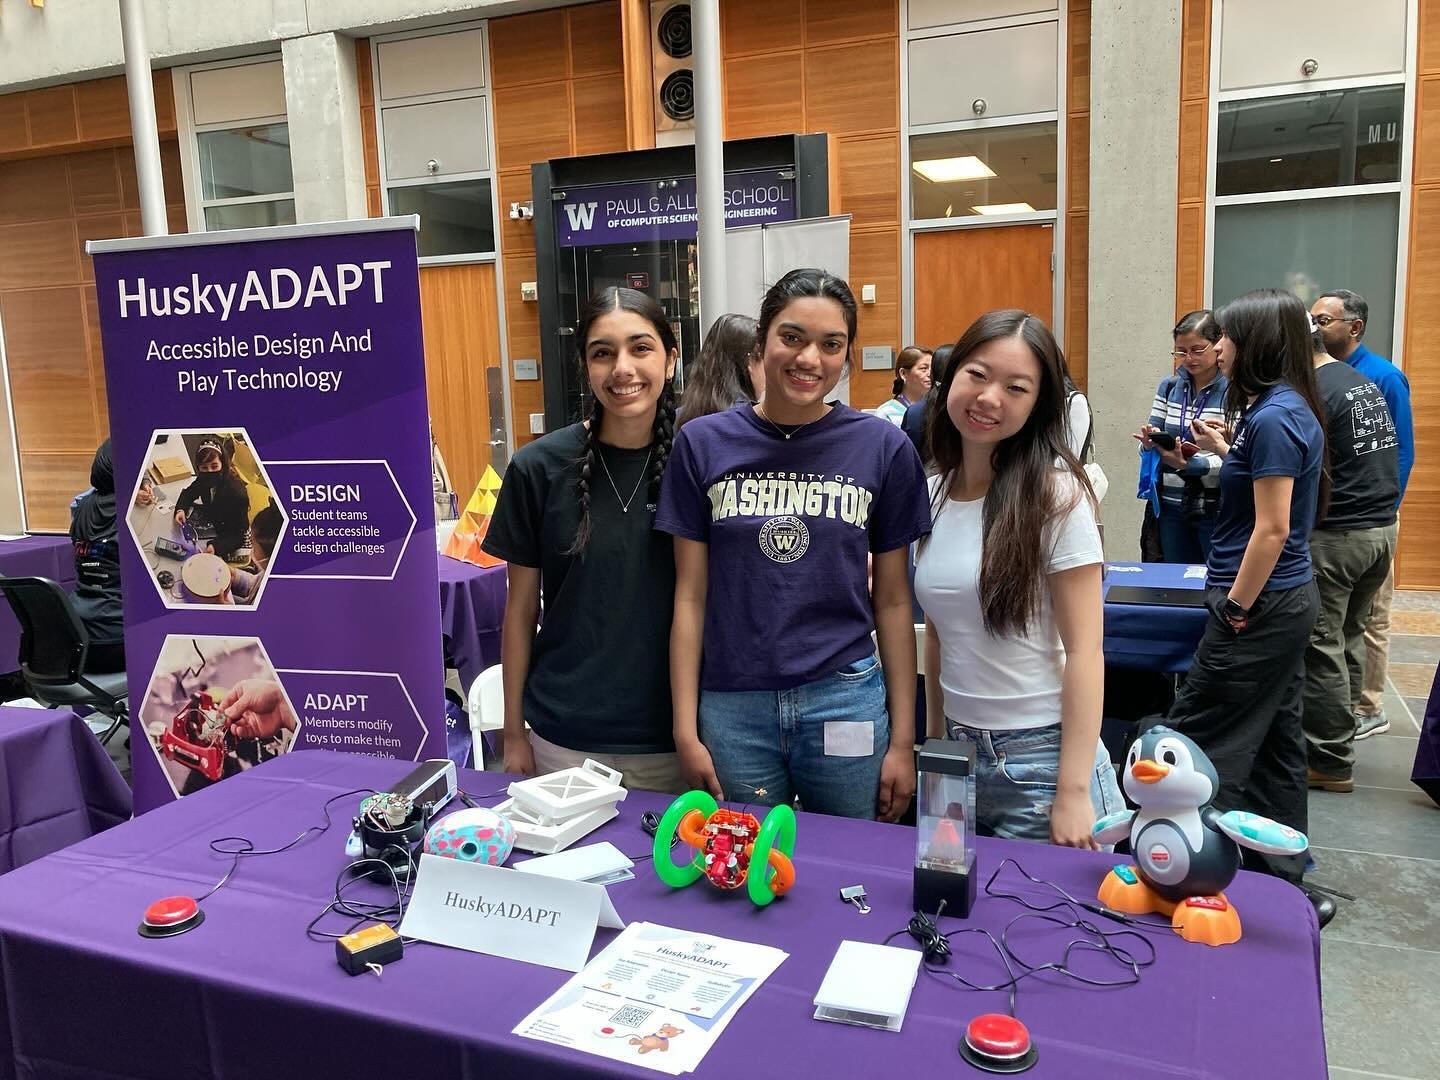 We recently tabled at Admitted Students Day. Thank you to everyone who dropped by to learn about HuskyADAPT, it was great meeting everyone! We hope to see you guys at future events.